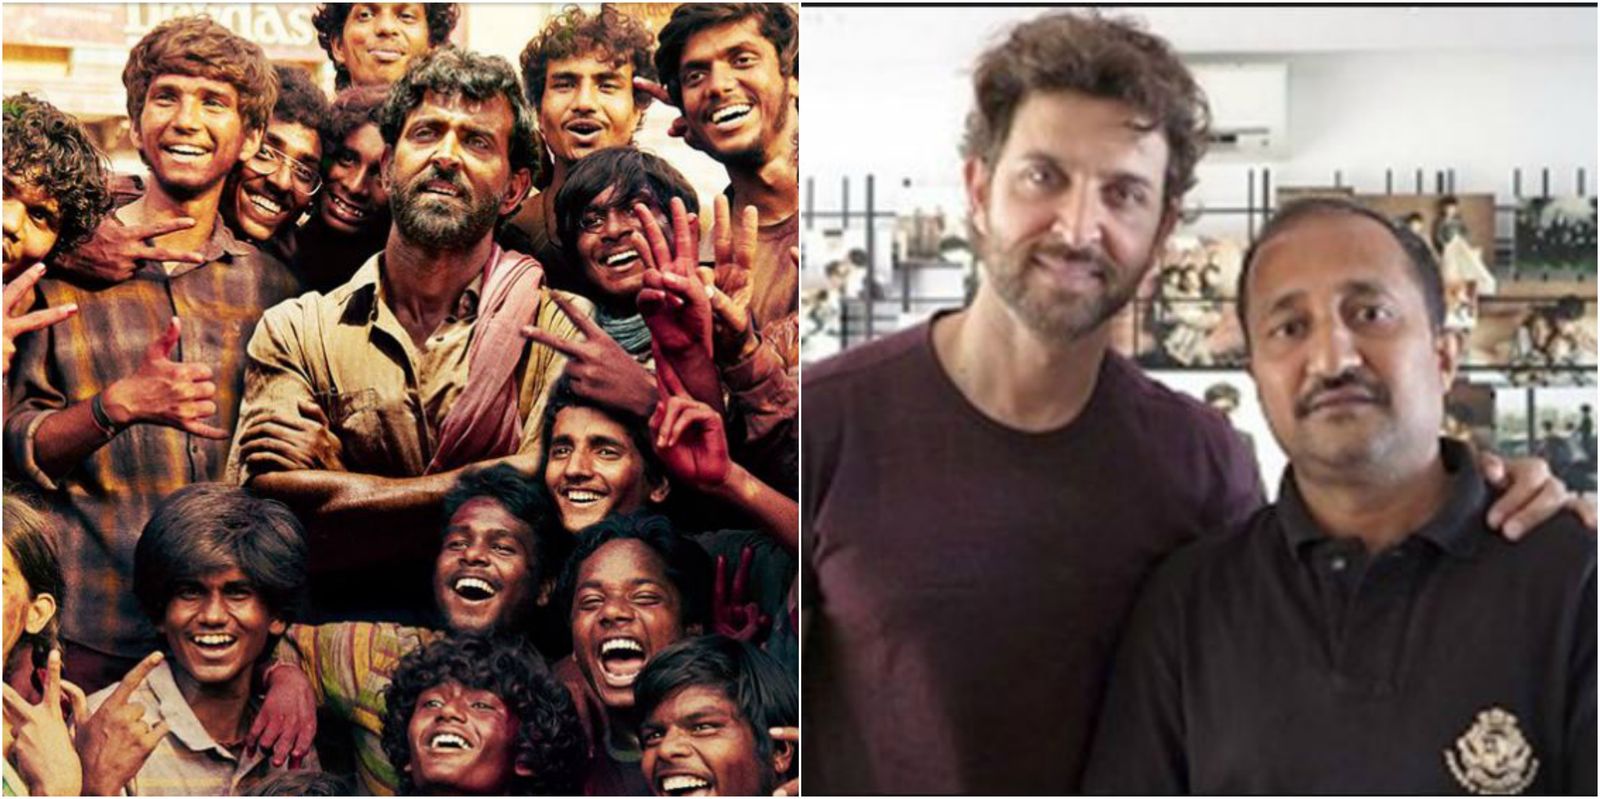  The Man Hrithik Roshan's Character In Super 30 Is Based On  Is A Fraud? Here Is All You Need To Know